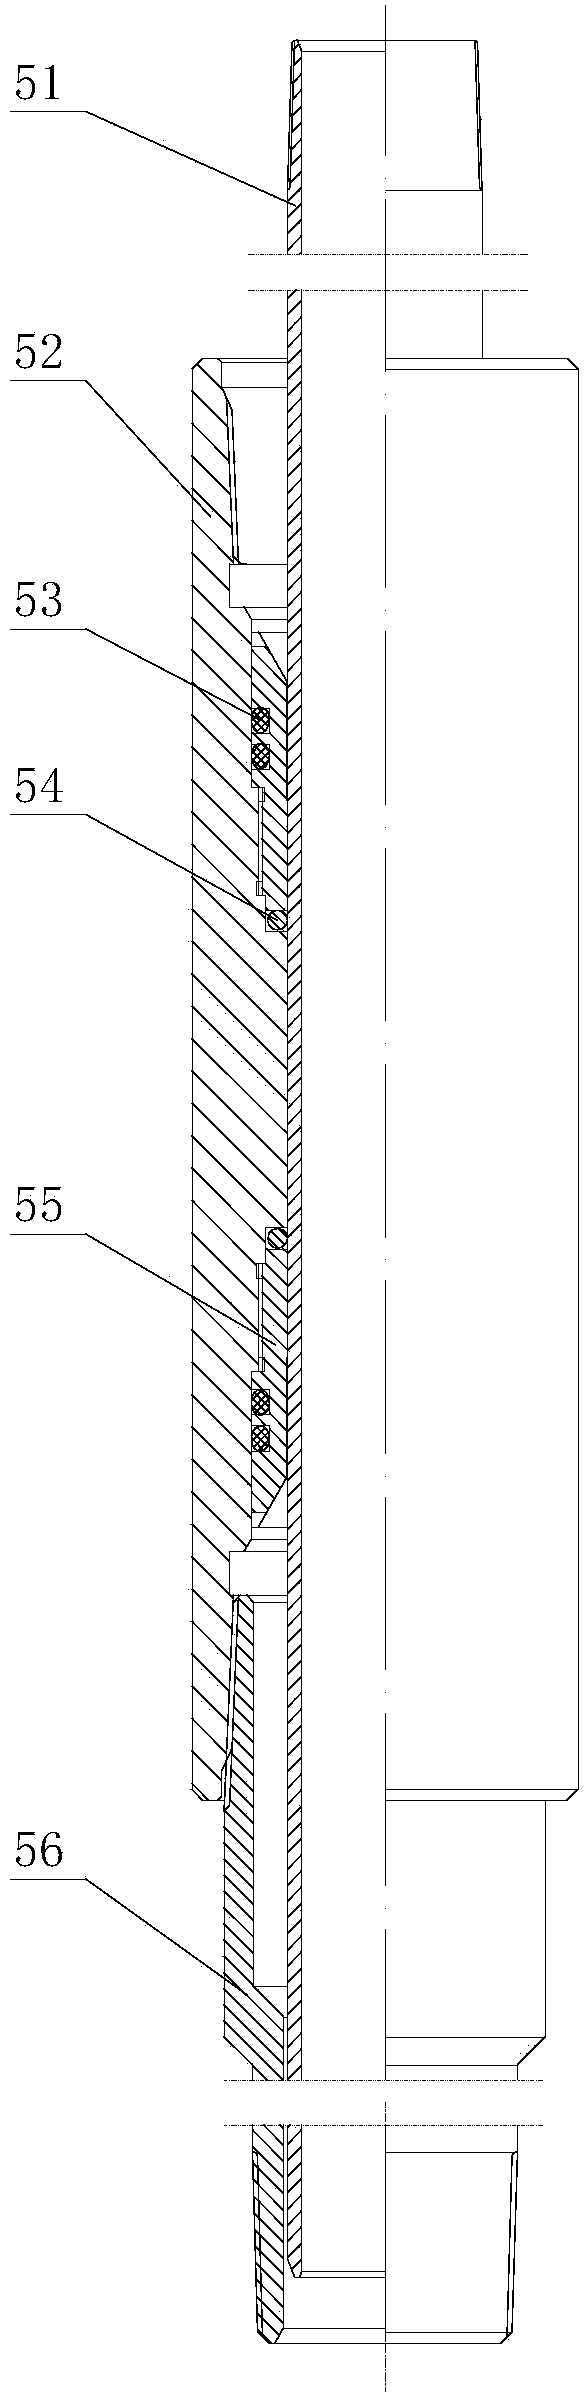 Water-gathering co-well layering co-charging process tubular column